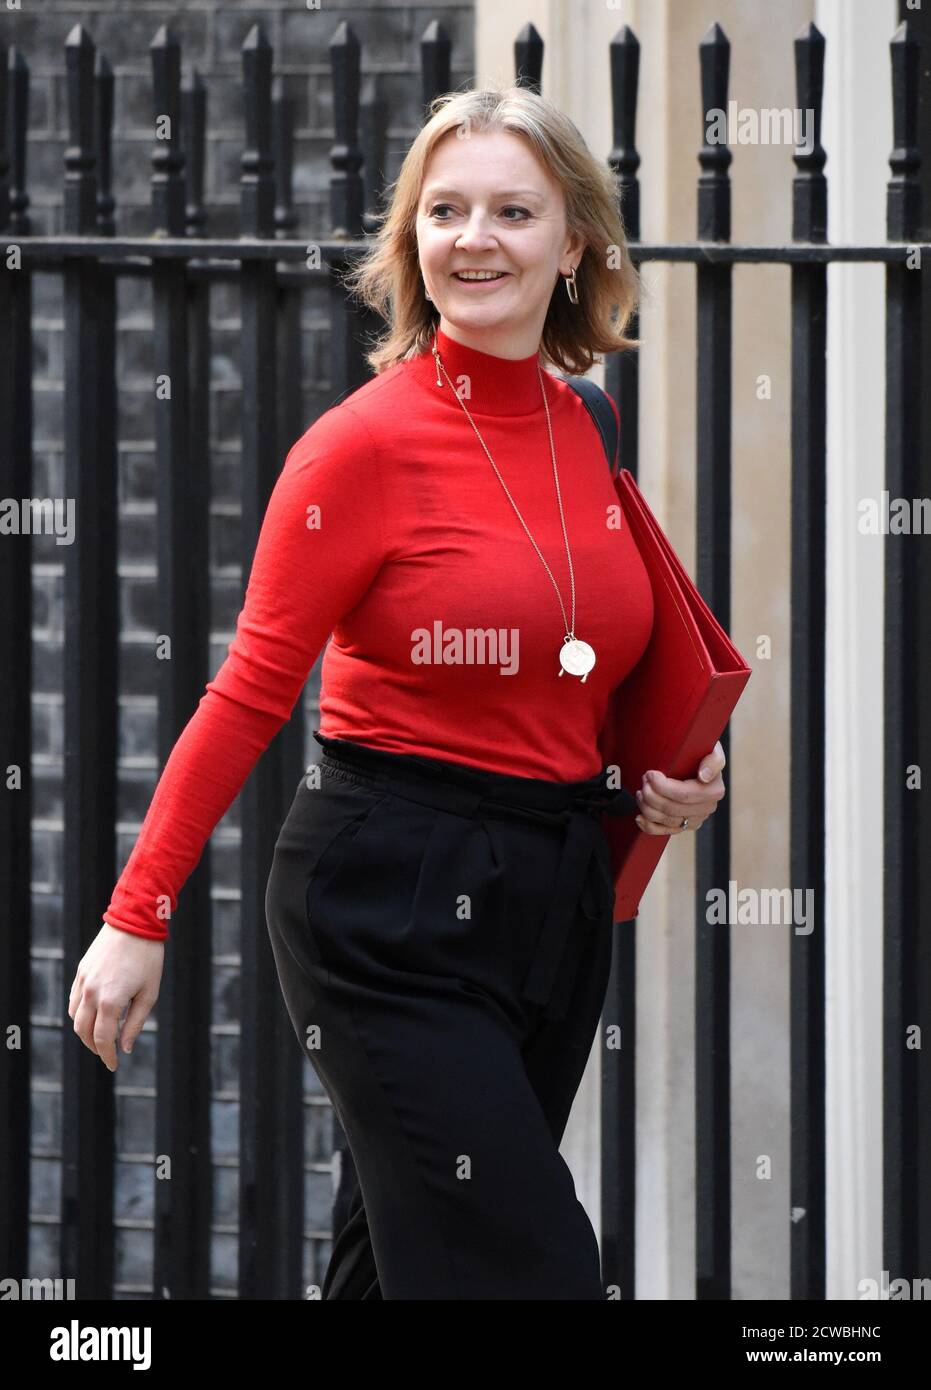 Photograph of Liz Truss. Elizabeth Mary Truss (1975-) a British politician serving as Secretary of State for International Trade and President of the Board of Trade since July 2019 and Minister for Women and Equalities since September 2019. Stock Photo